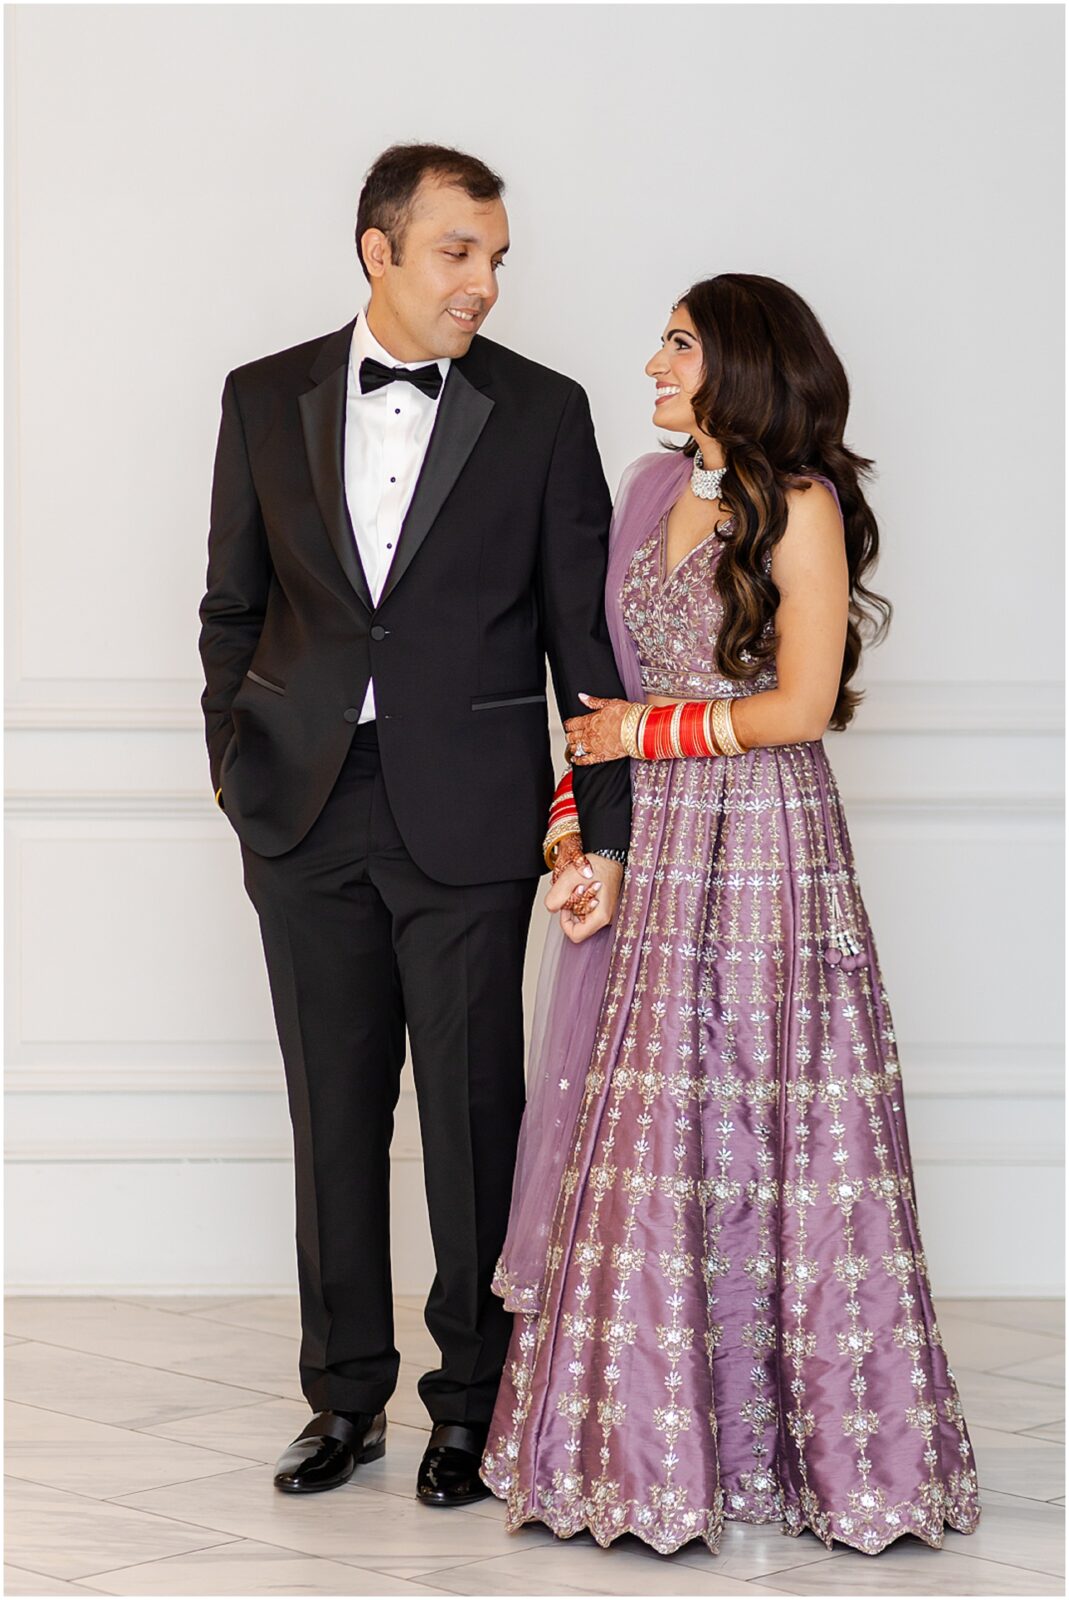 Wedding at the Kansas City Intercontinental for Indian Sikh South Asian Punjabi Wedding Reception - Wedding Photography & Film Videography by Mariam saifan Photography - wedding planning events by elle